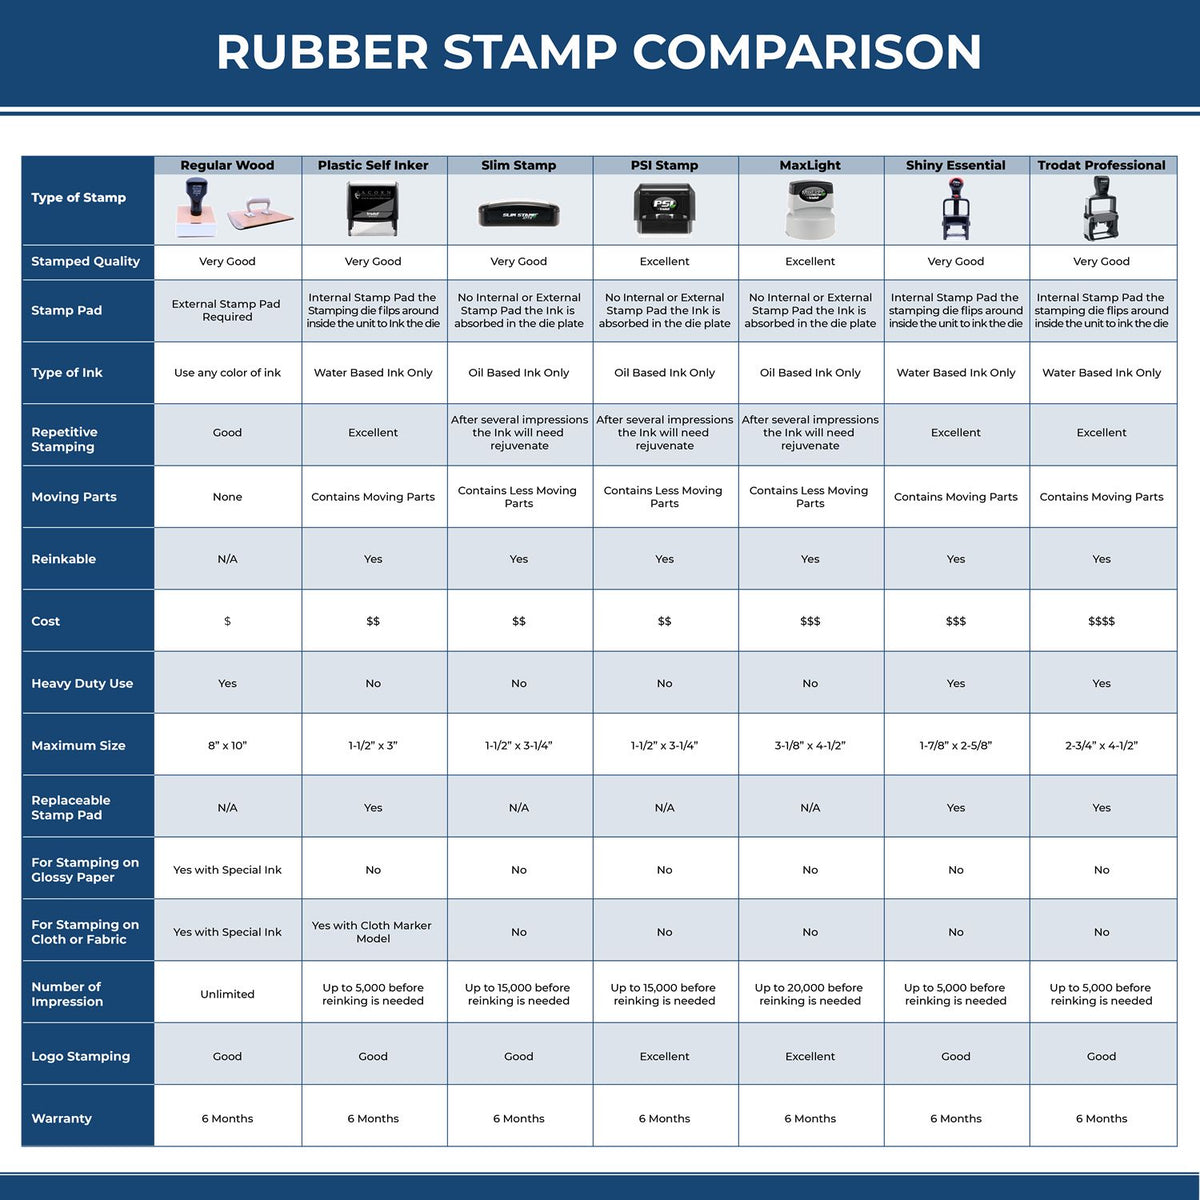 Large Self Inking Blue Ribbon Stamp 4642S Rubber Stamp Comparison